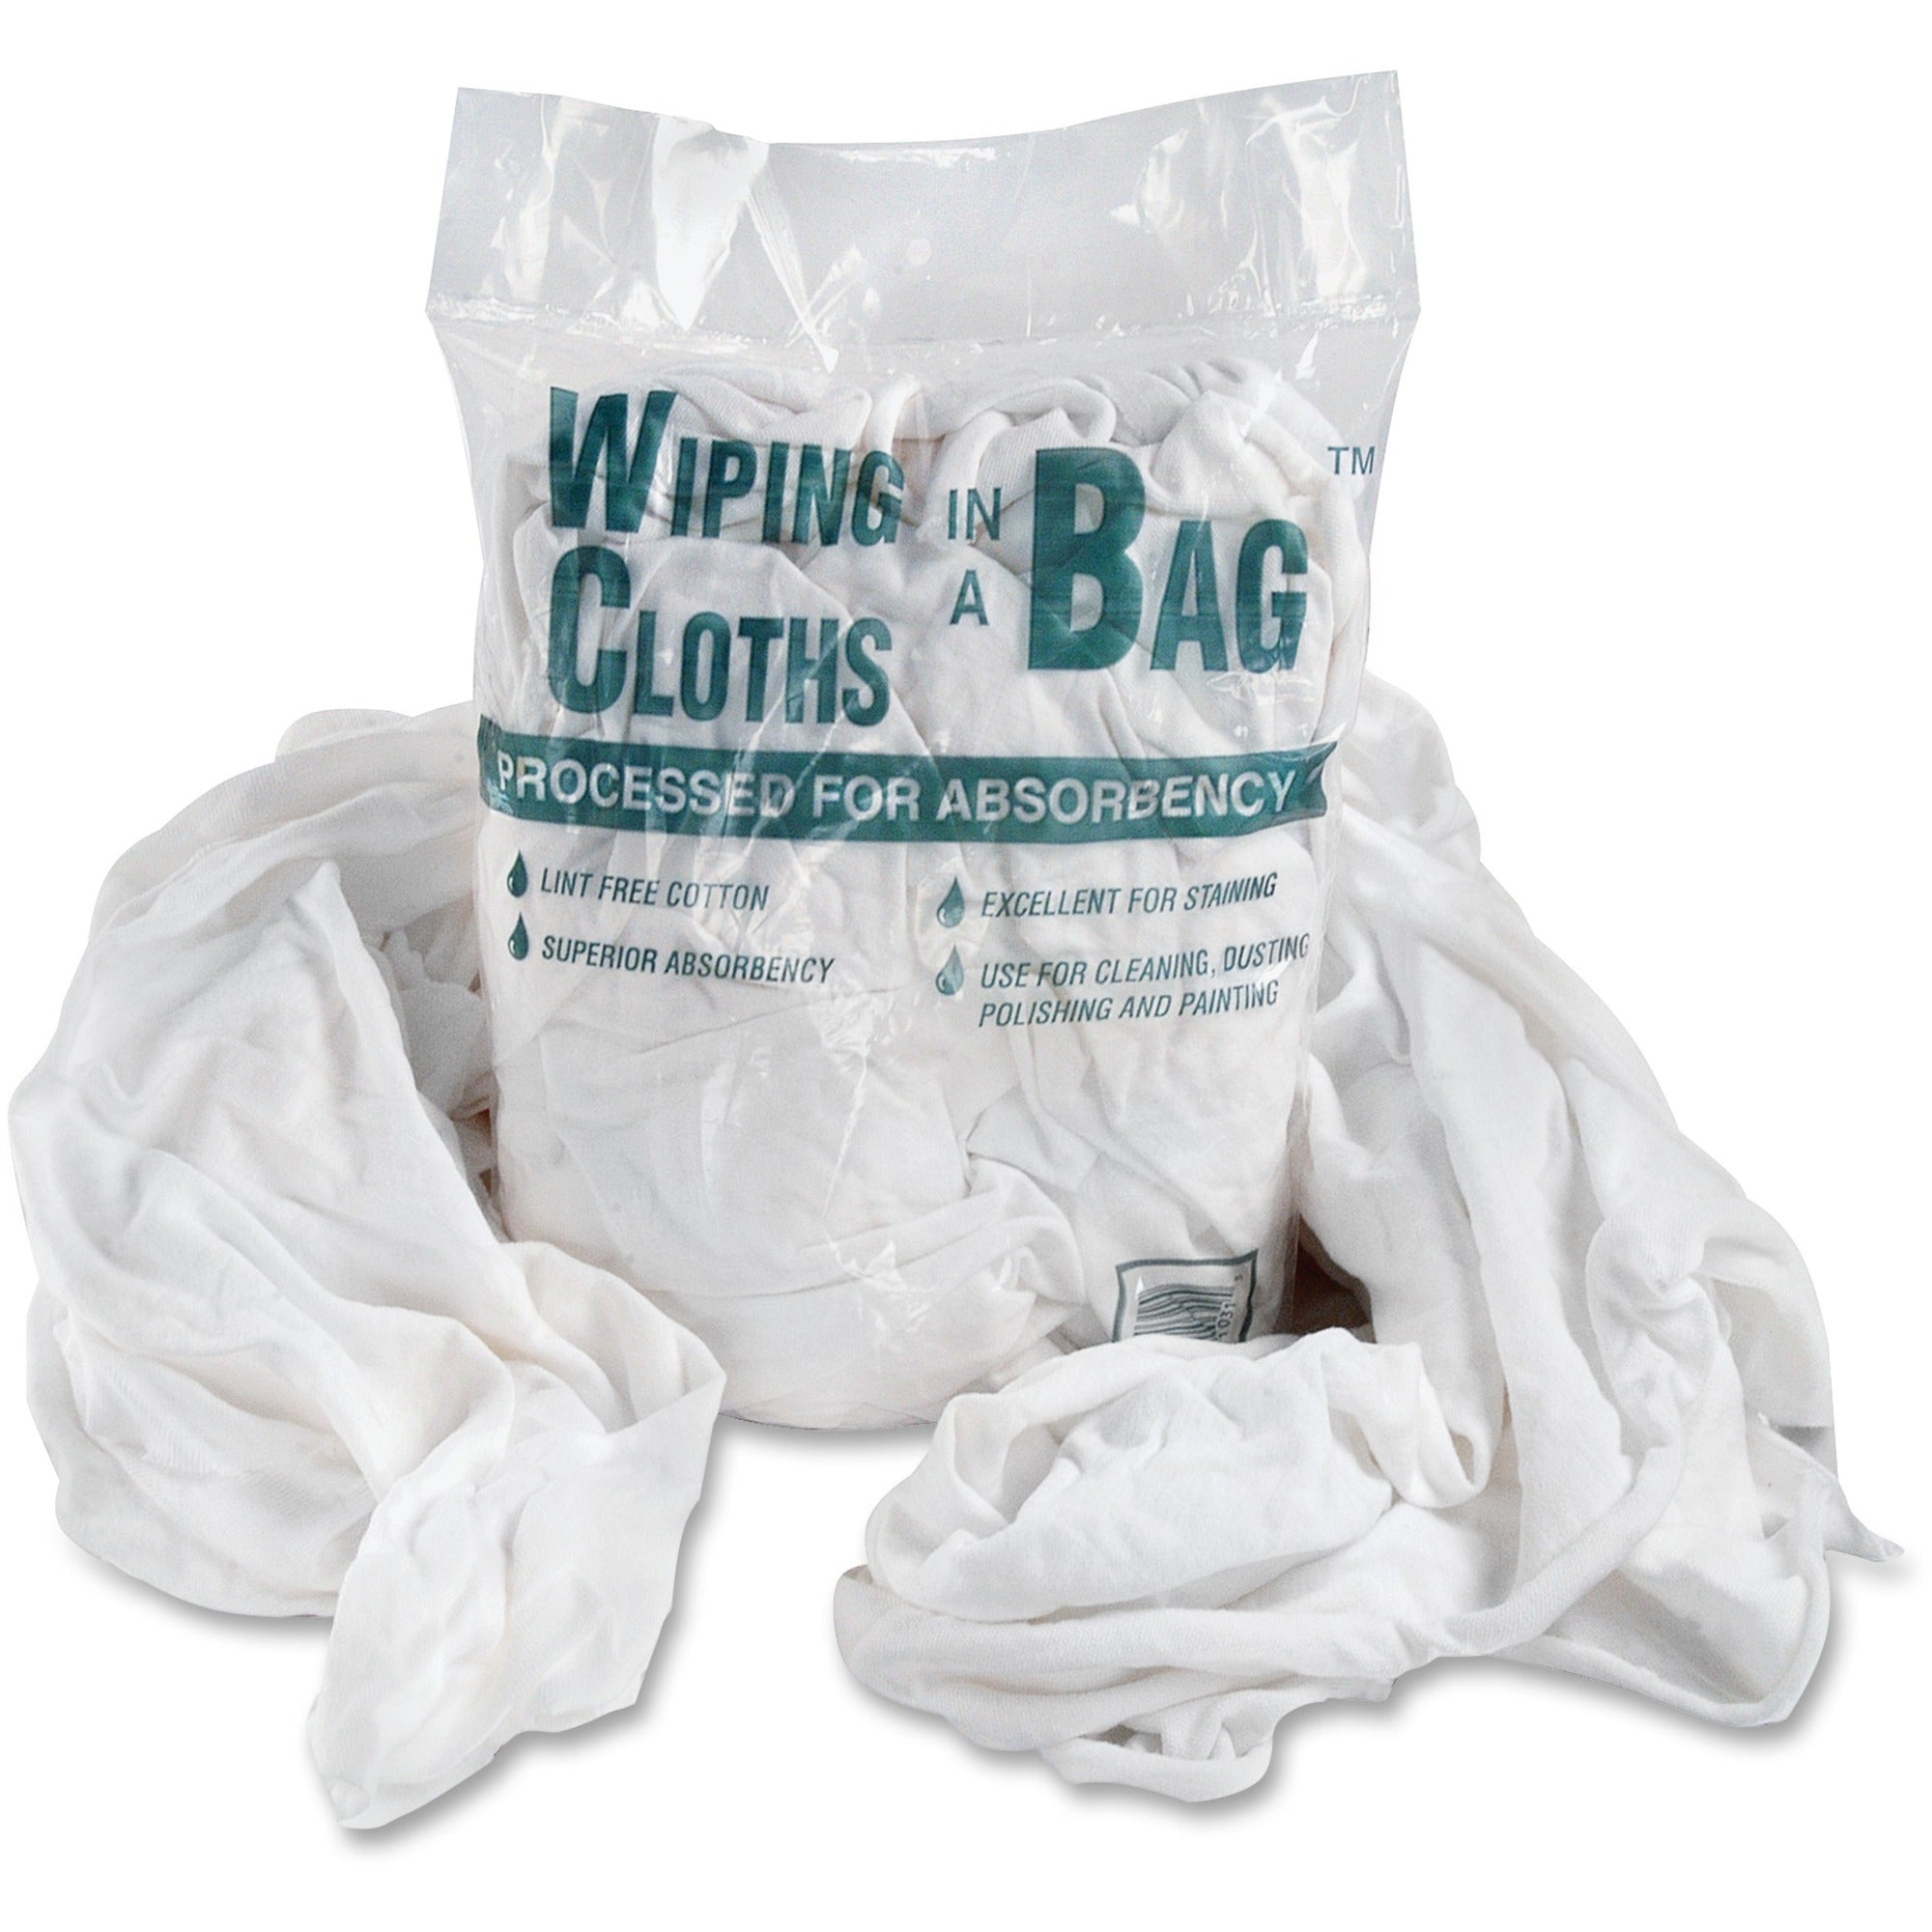 Bag A Rags Office Snax Cotton Wiping Cloths - For Multipurpose - 1 / Bag - Lint-free, Absorbent, Reusable - Blue, White - 